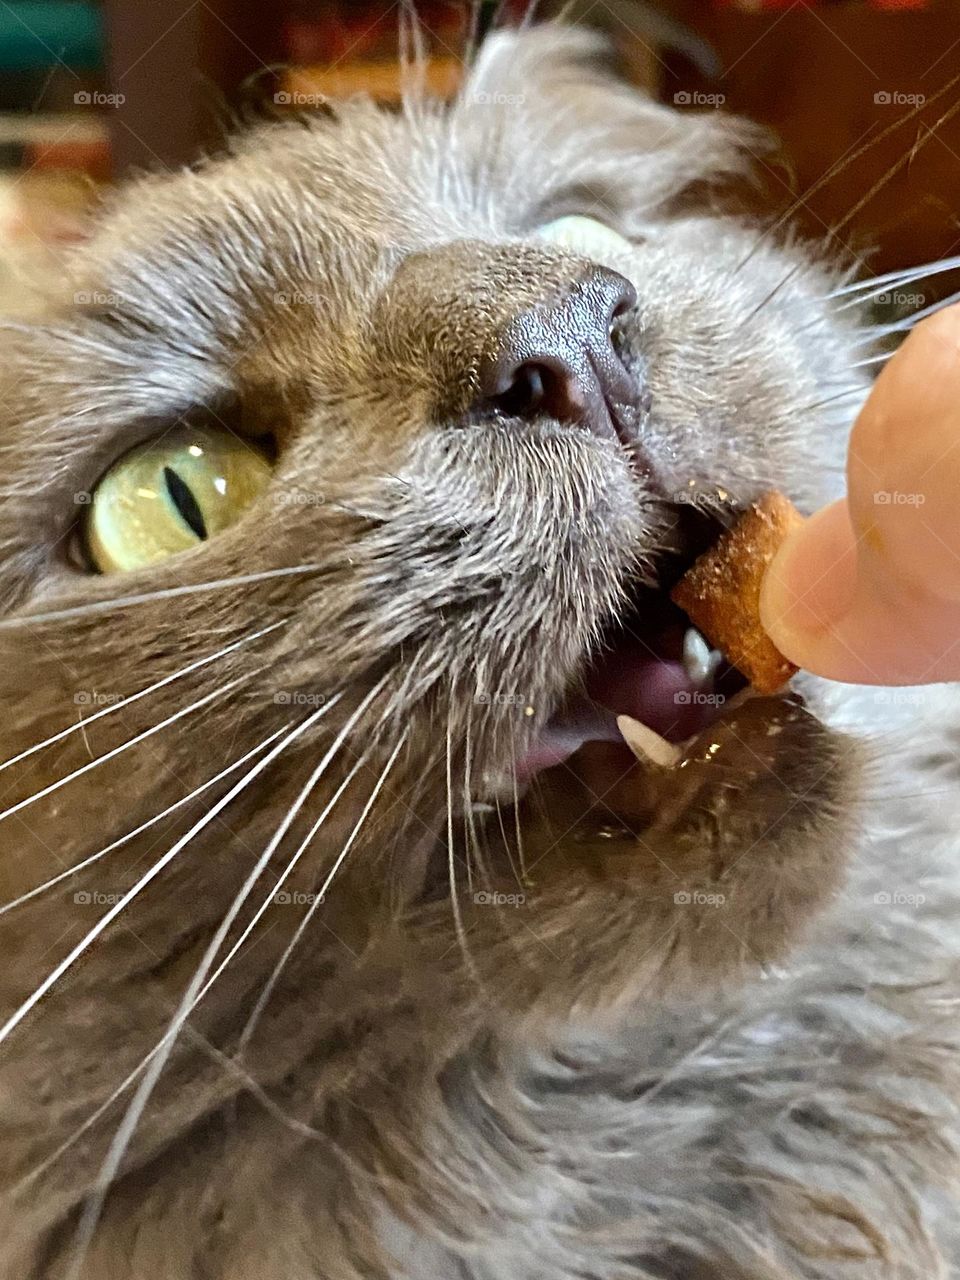 A grey cat eating a cat treat out of someone’s hand